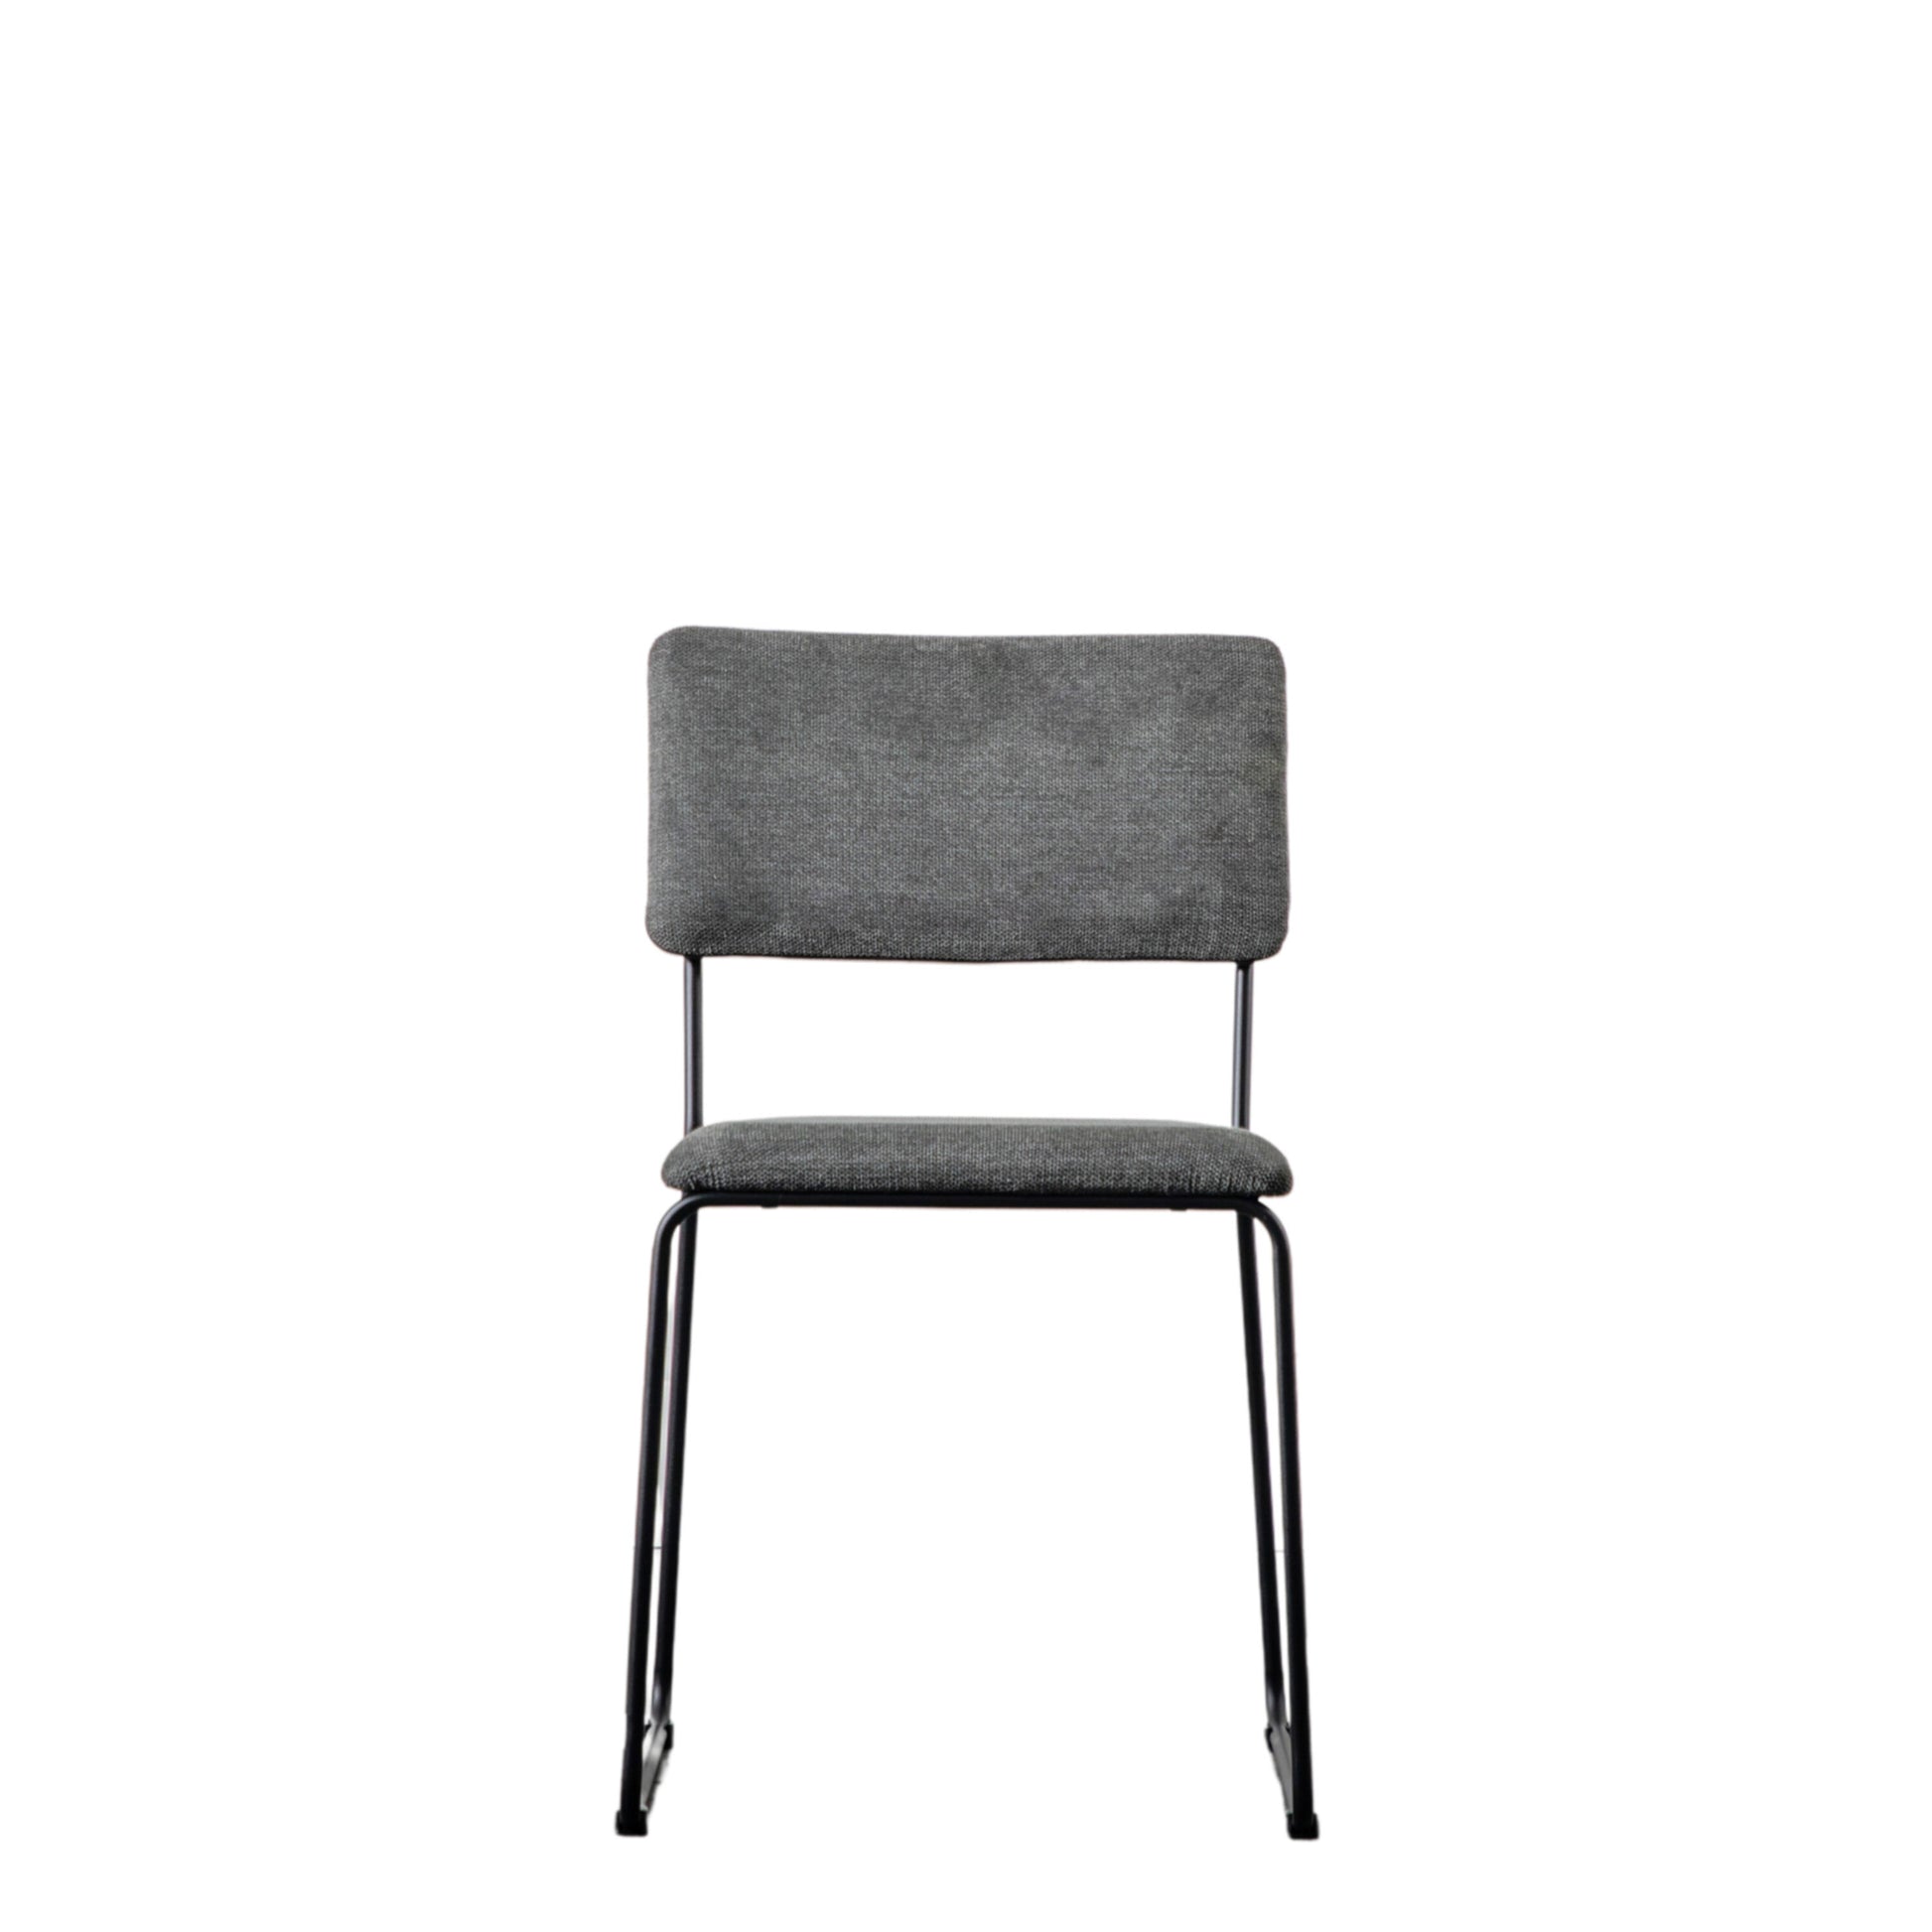 Chloe Fabric And Metal Dining Chair | Charcoal (2 Pack)